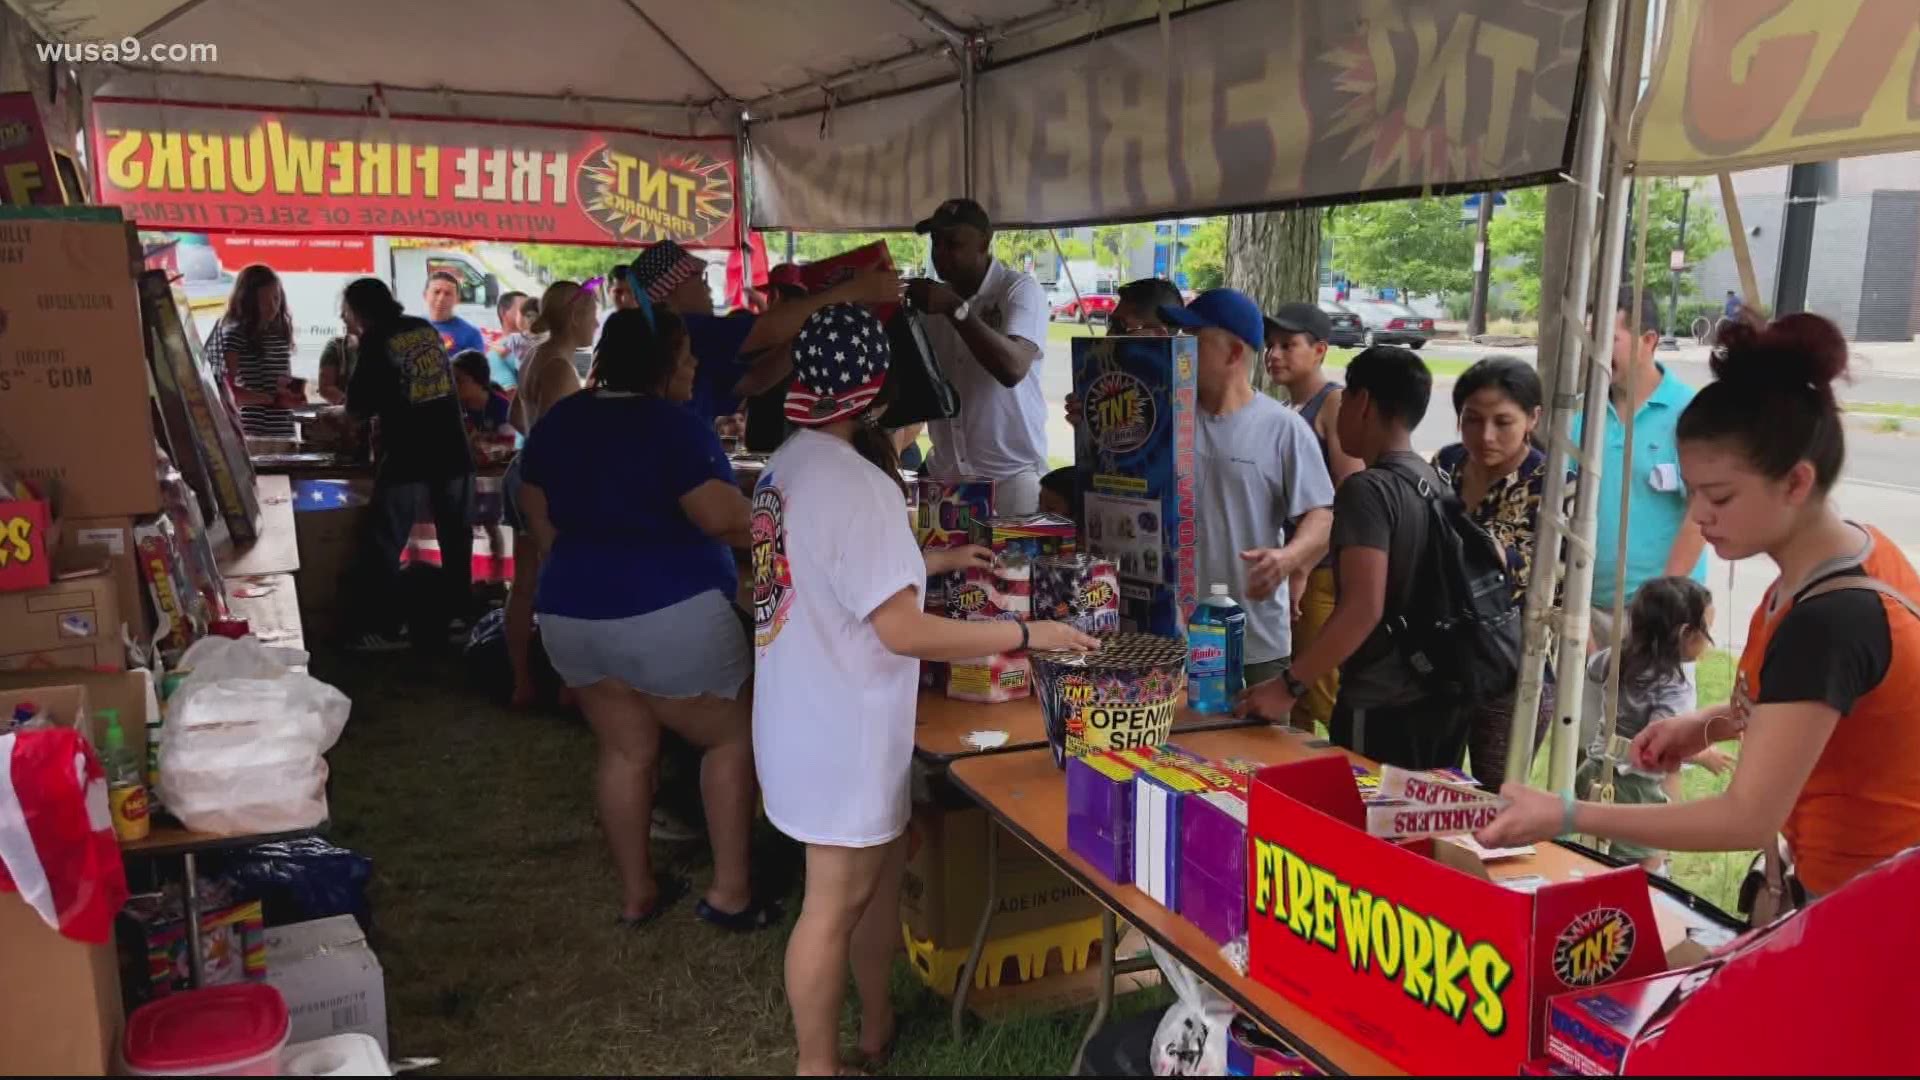 D.C. Mayor Muriel Bowser and President Donald Trump are creating fireworks of their own when it comes to 4th of July celebrations.